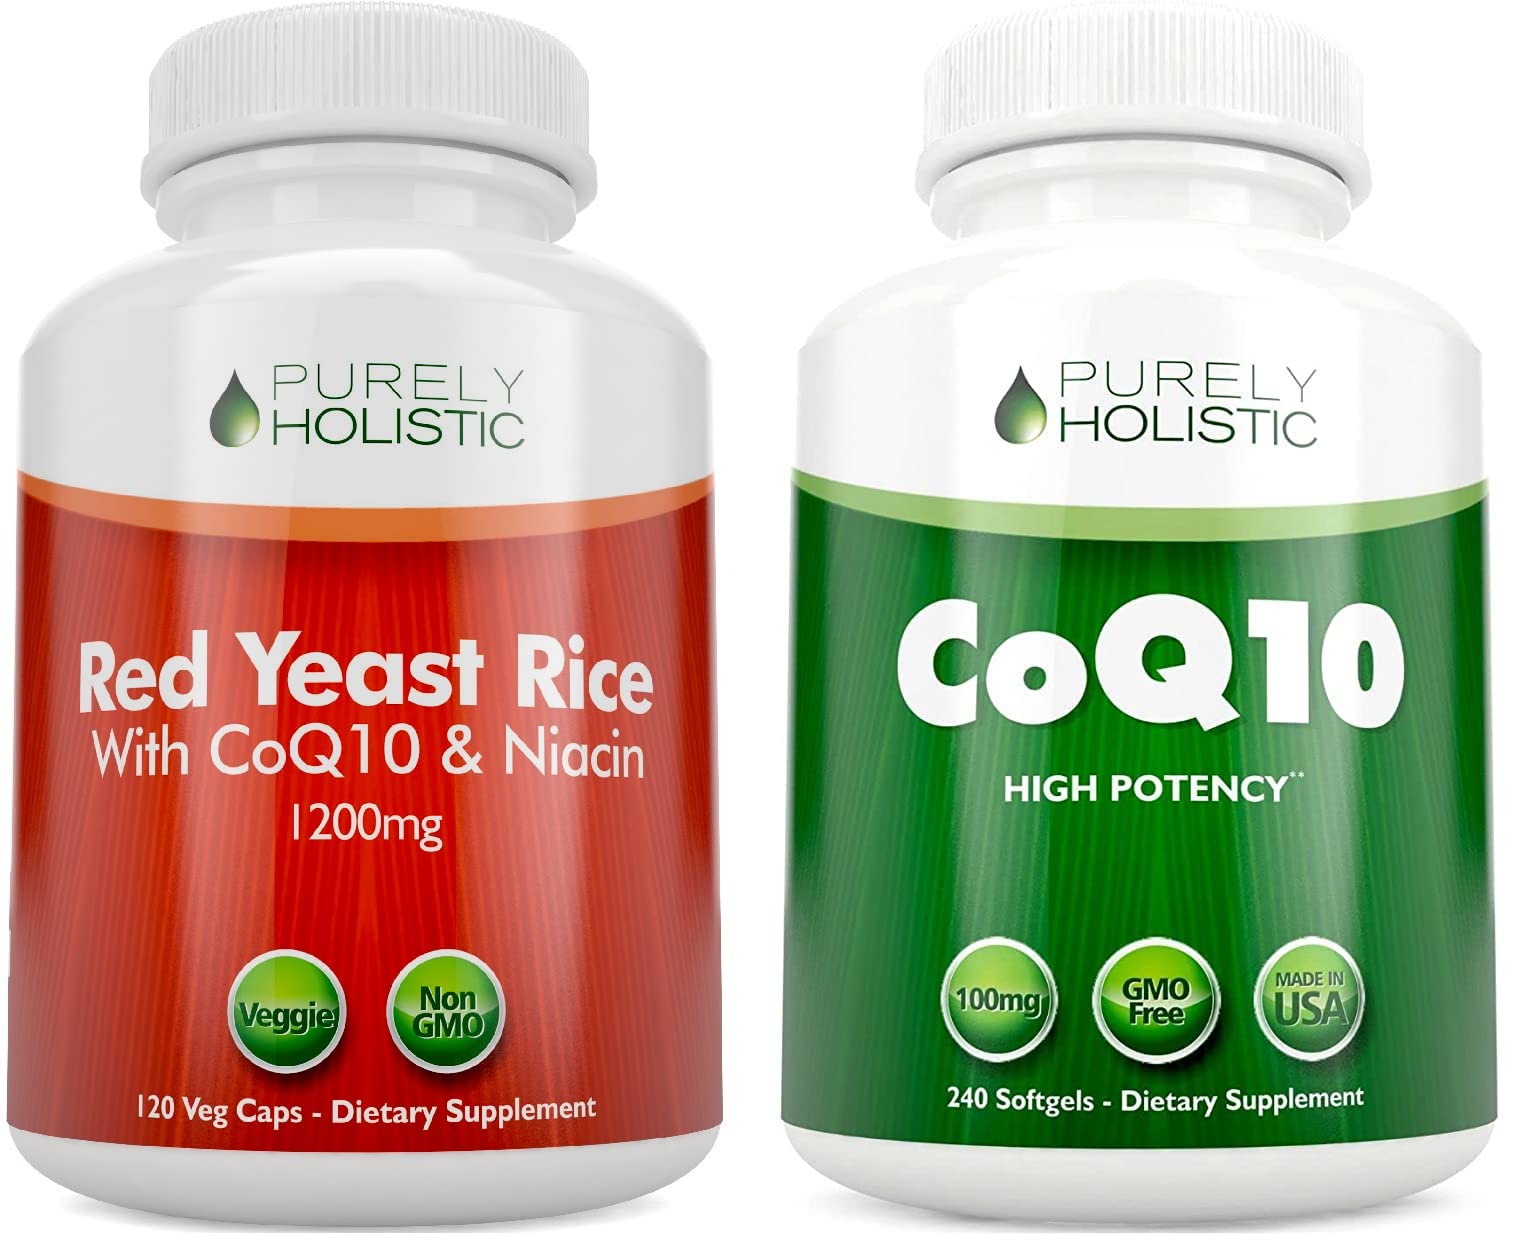 Purely Holistic Red Yeast Rice 1200mg & Niacin + CoQ10 100mg - 120 Capsules & 240 Softgels Bundle - Made in USA